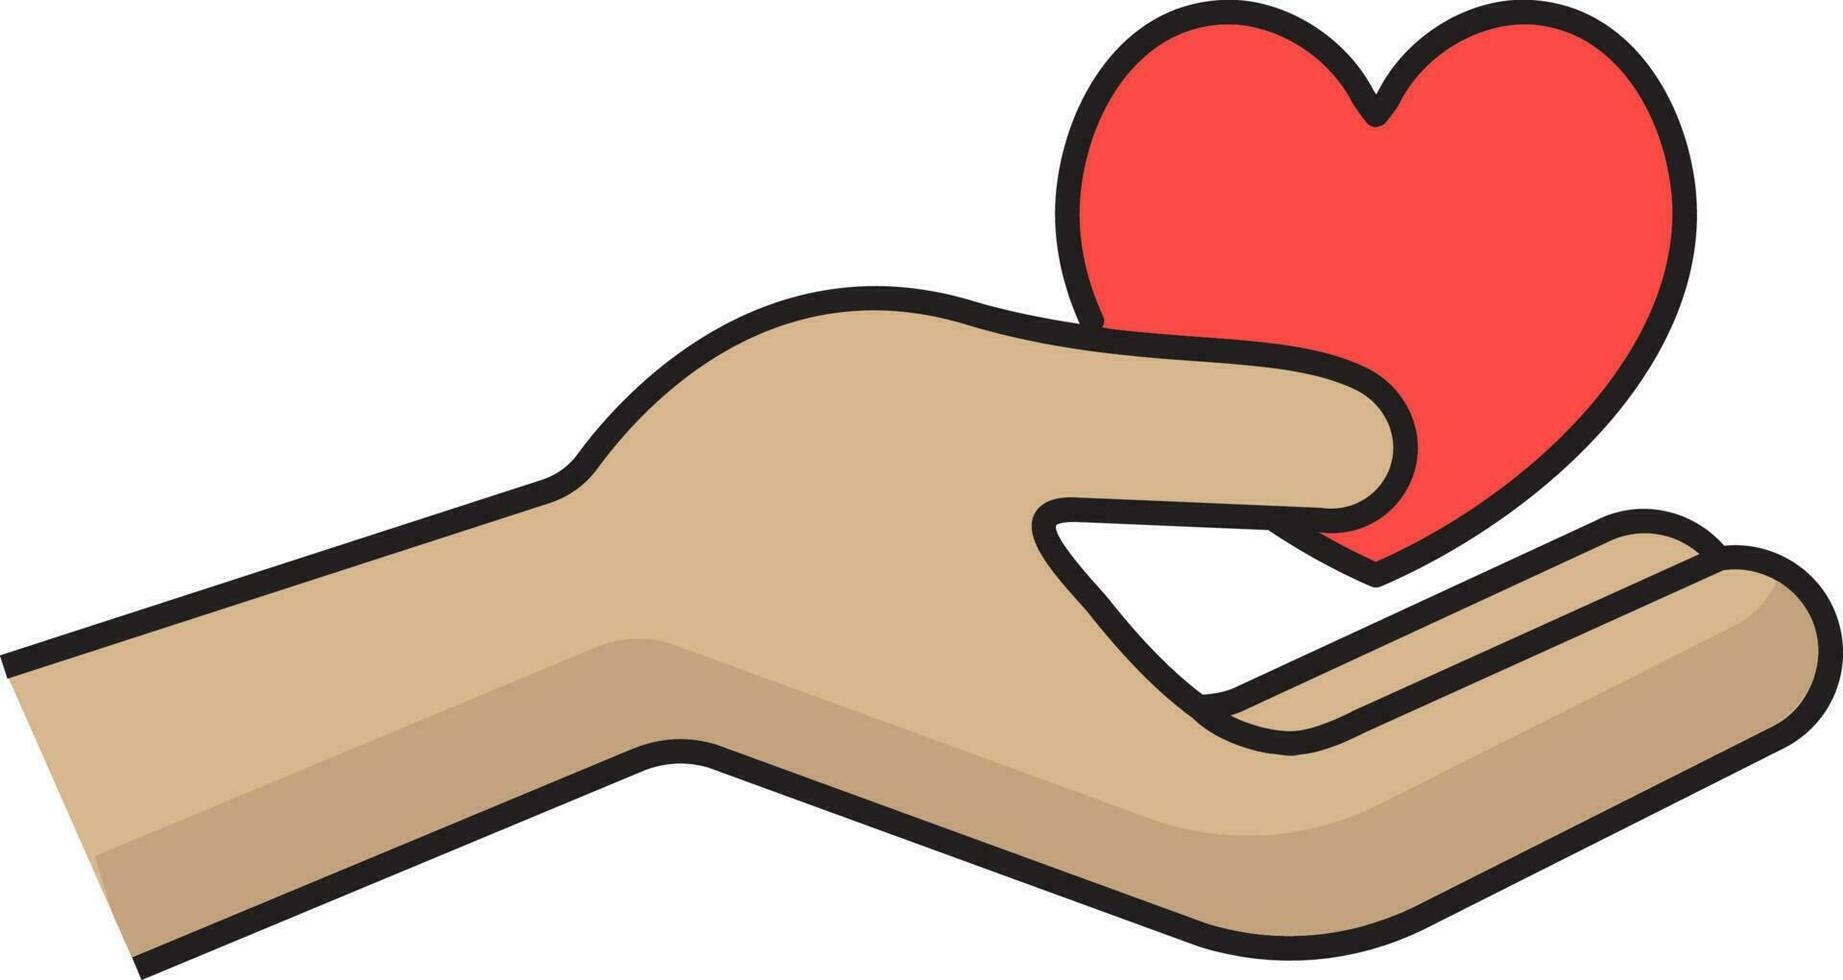 Heart Holding Hand Icon In Brown And Red Color. vector